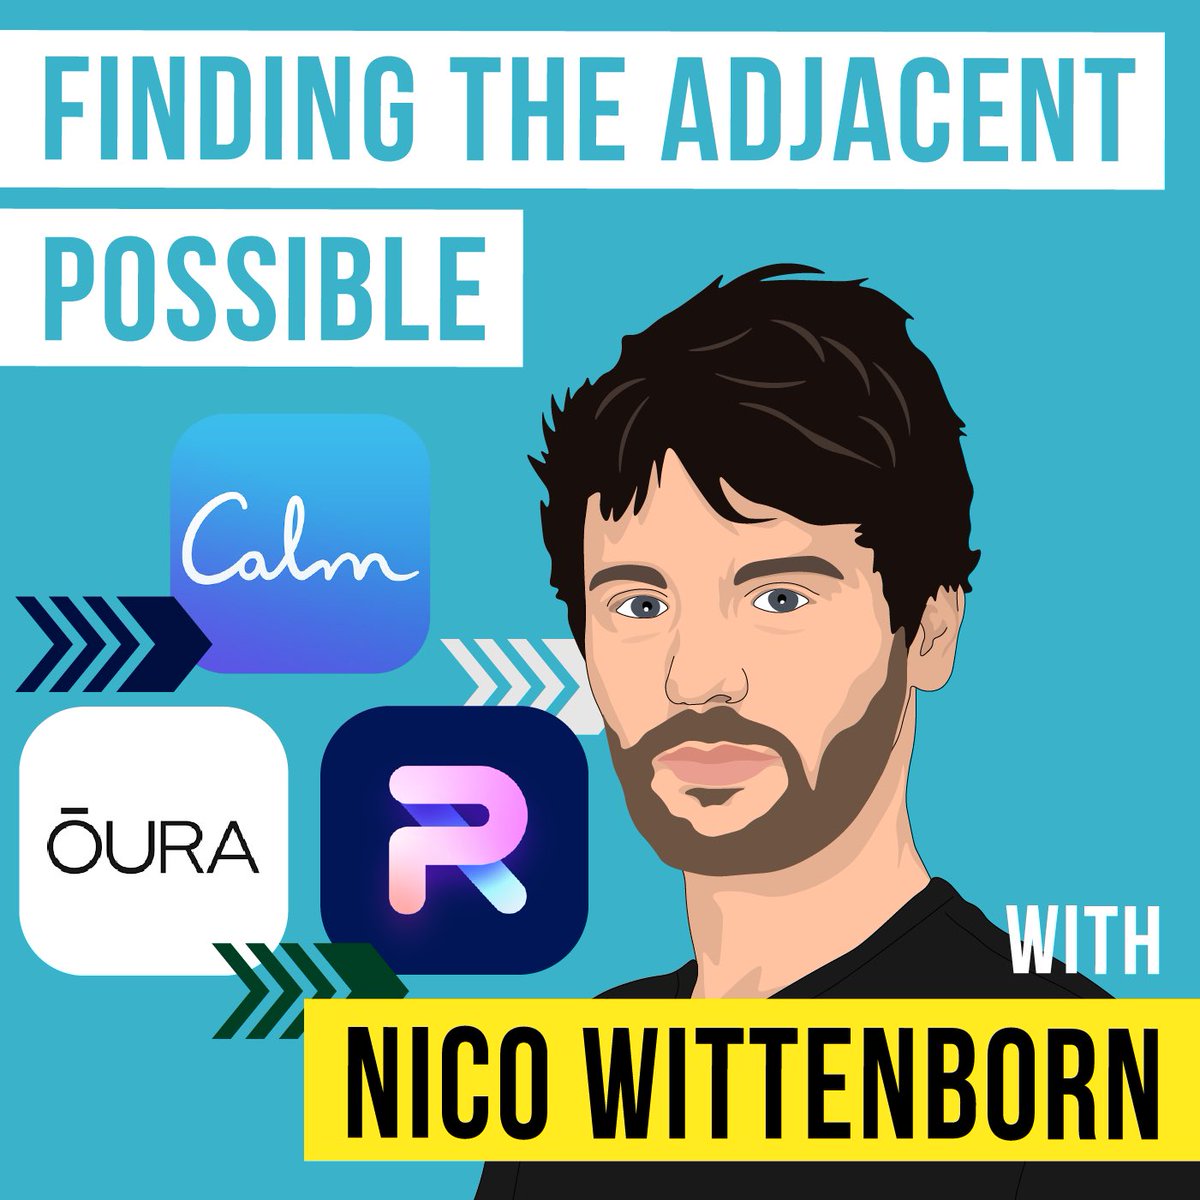 Today’s conversation is with @ncsh While consumer investing has been less popular in the last few years, Nico has found a way to do it with great success His method is to explore “the adjacent possible” and he’s become a deep expert on consumer subscriptions I learned a ton